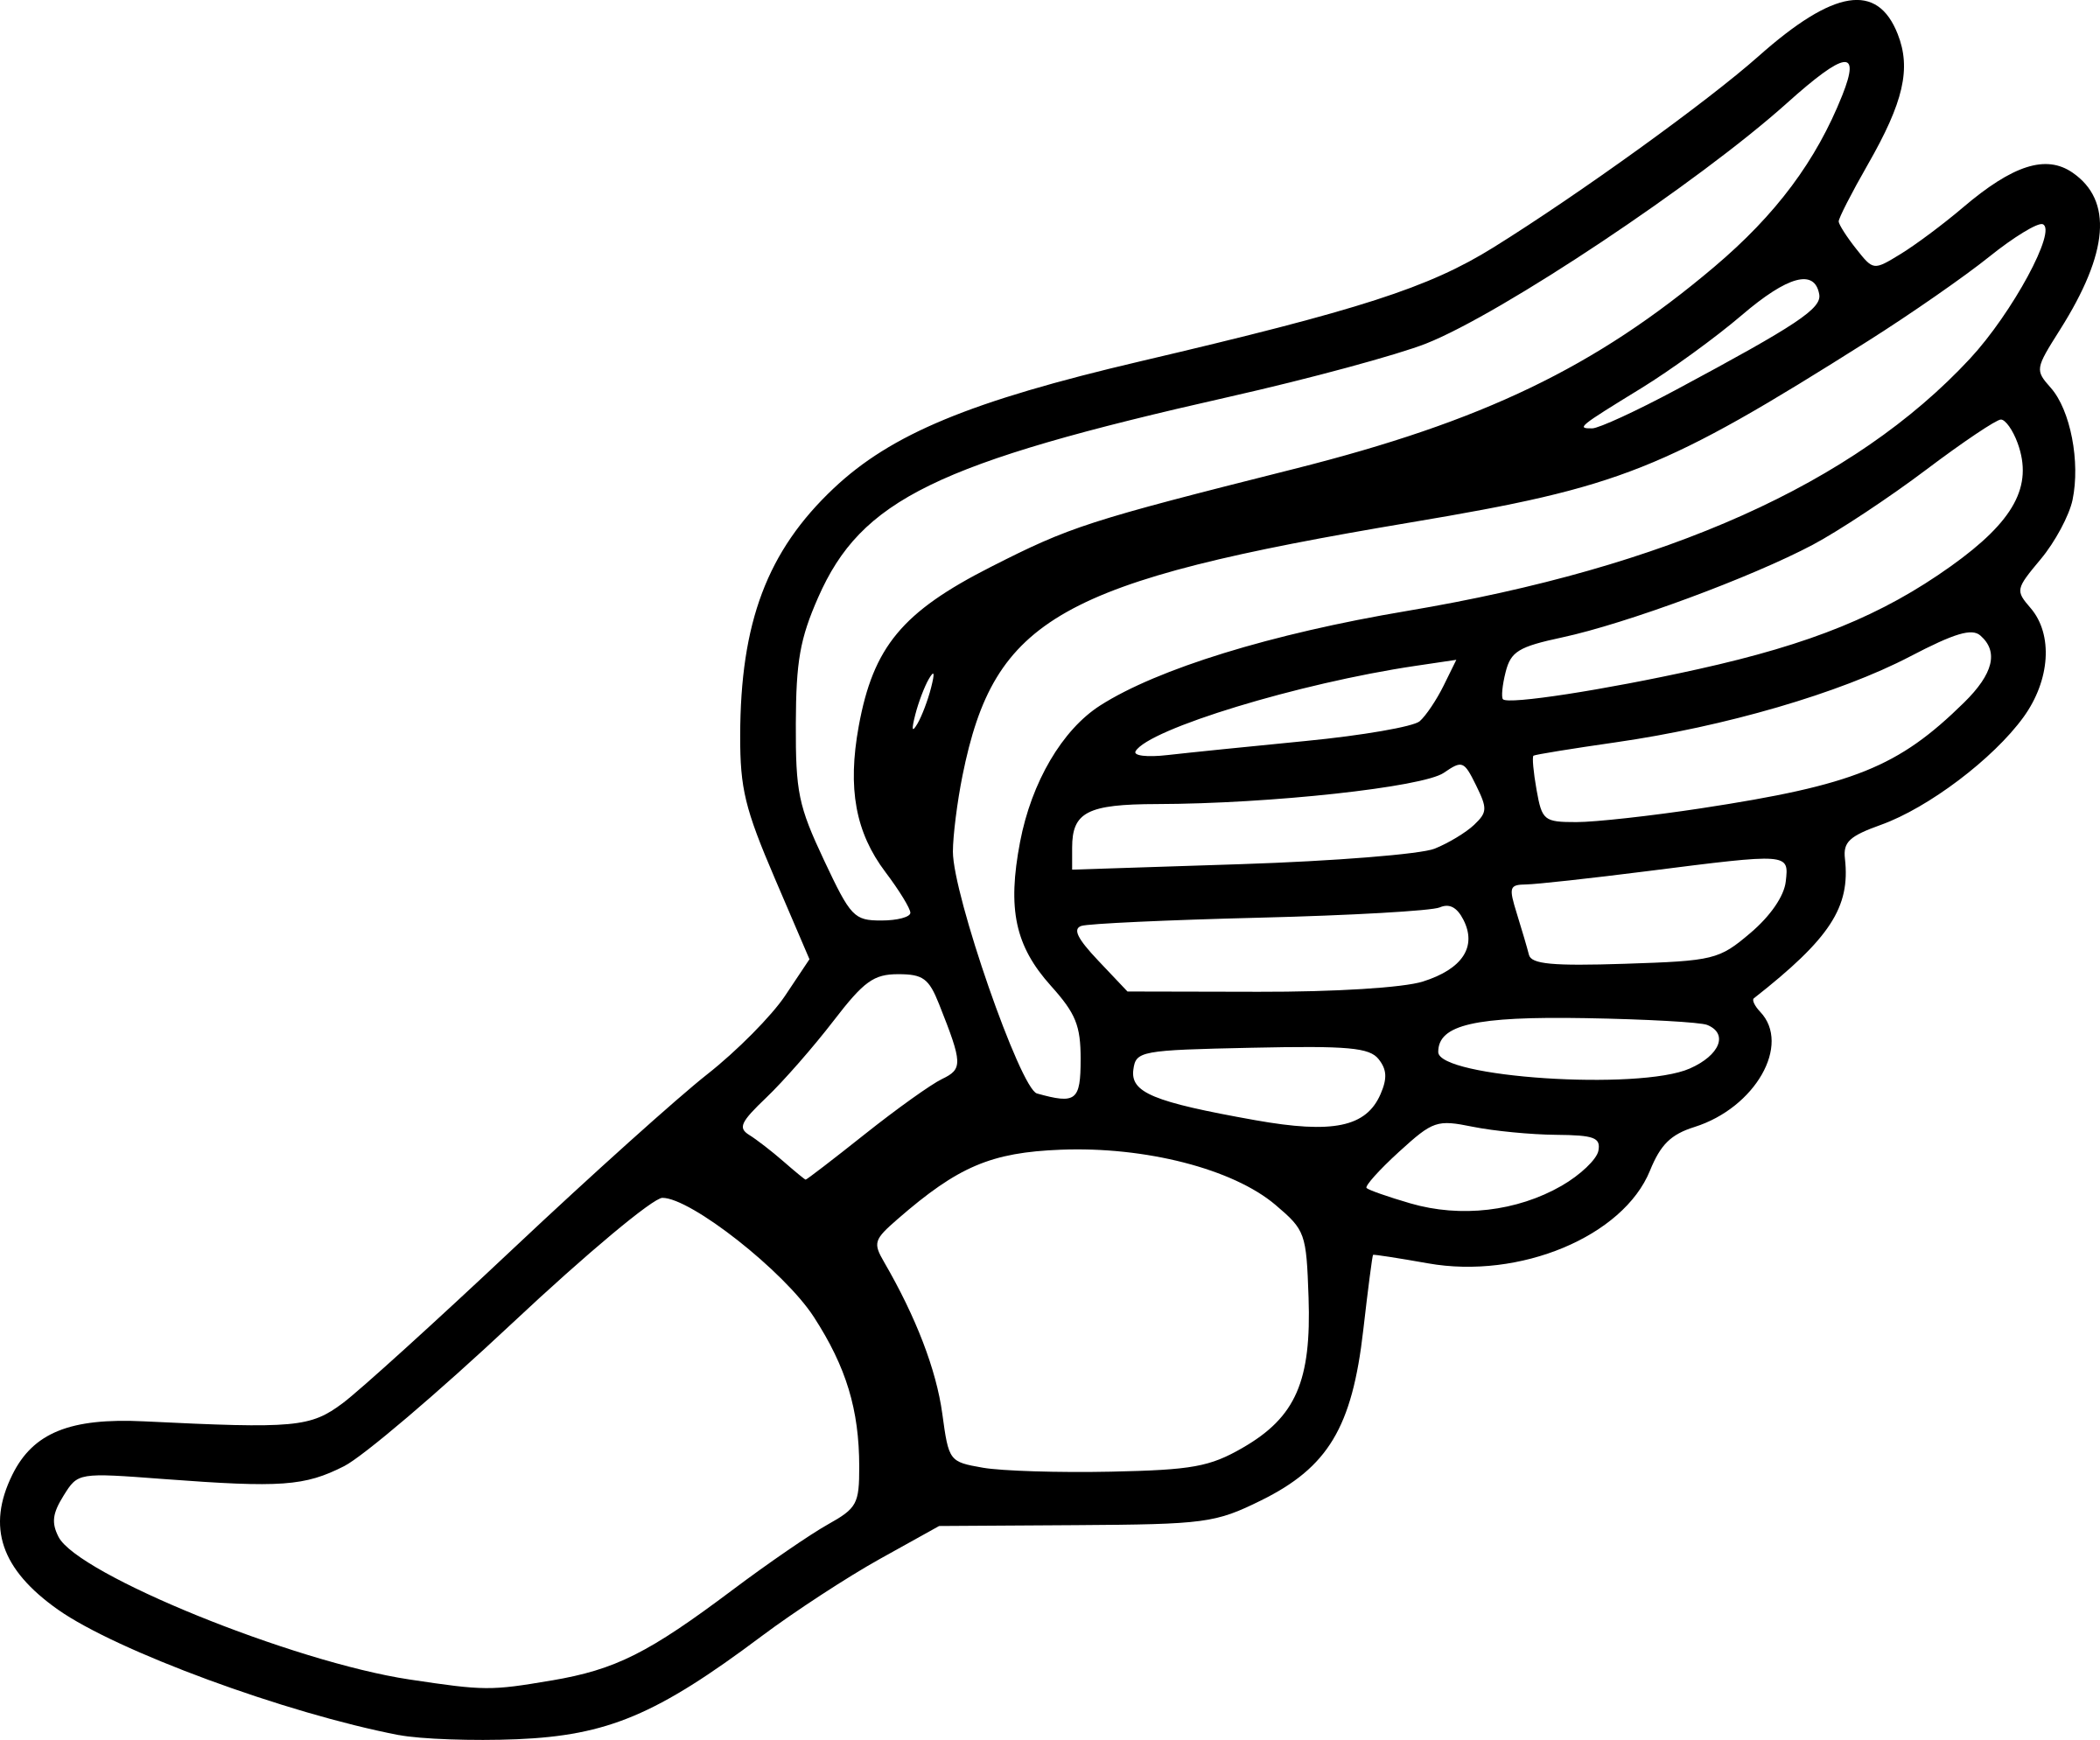 Winged Foot Logo - Winged Foot Logo Group with 64+ items